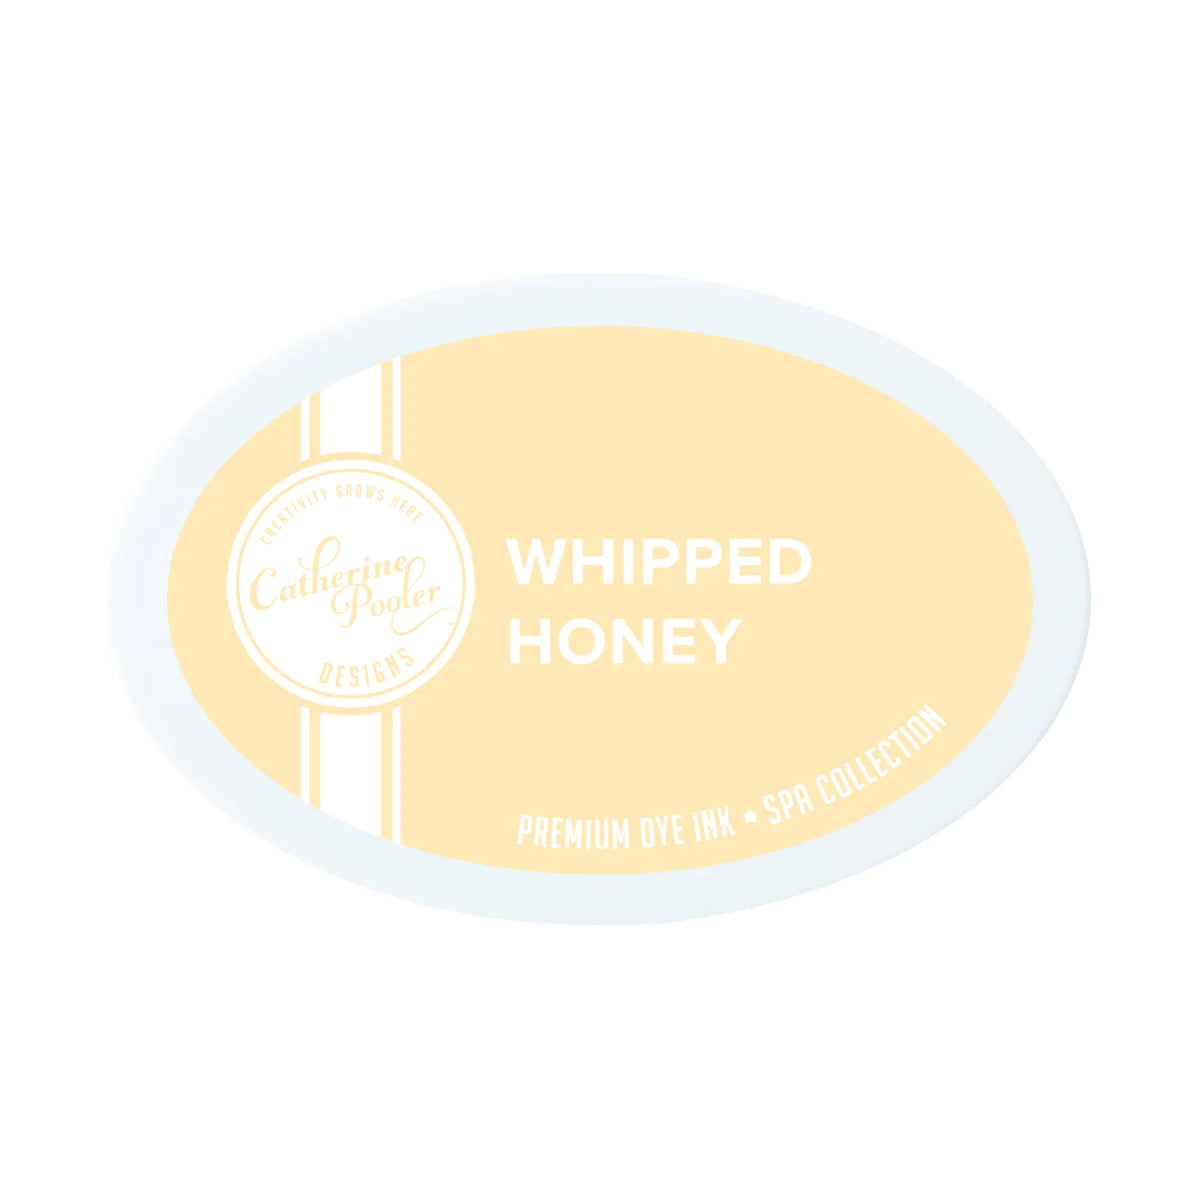 Whipped Honey Premium Dye Ink Pad - Spa Collection